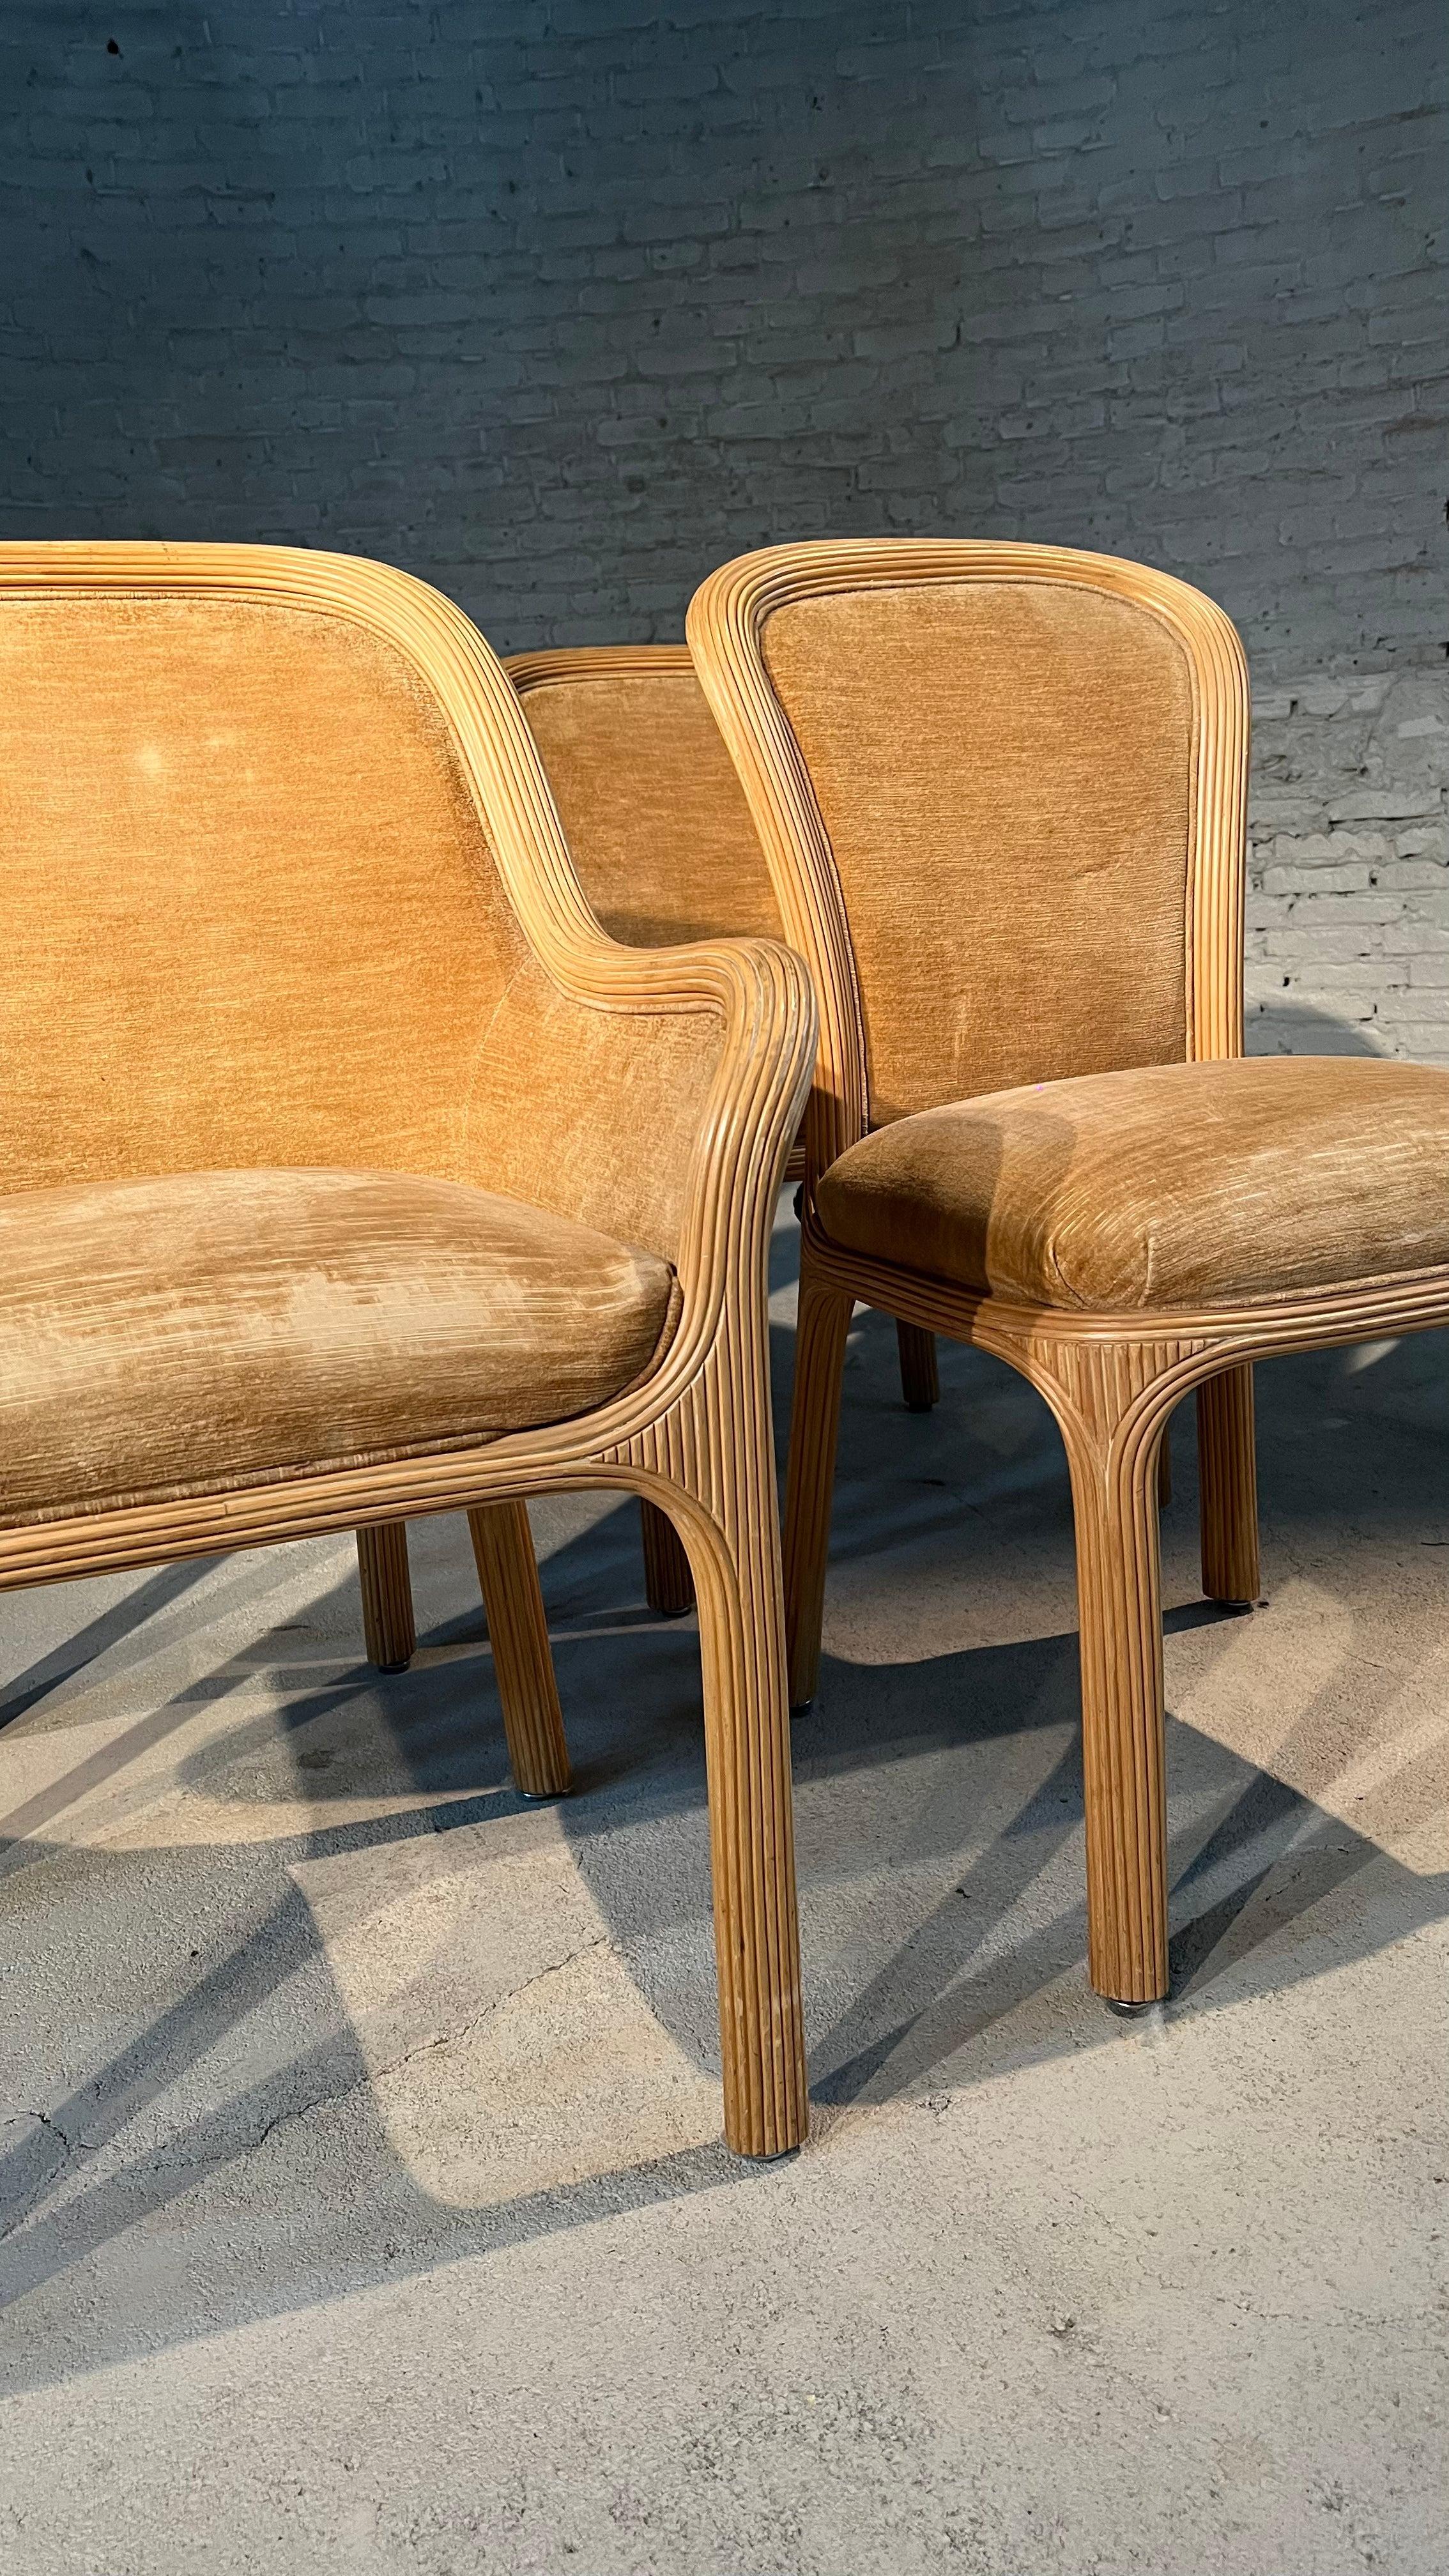 Classy set of 6 Dining chairs in Bamboo structure and original velvet upholstery. Design by German designer Karl Rausch for Baker.

Owing to the company’s collaborations with many leading designers and artists over time, vintage Baker furniture is